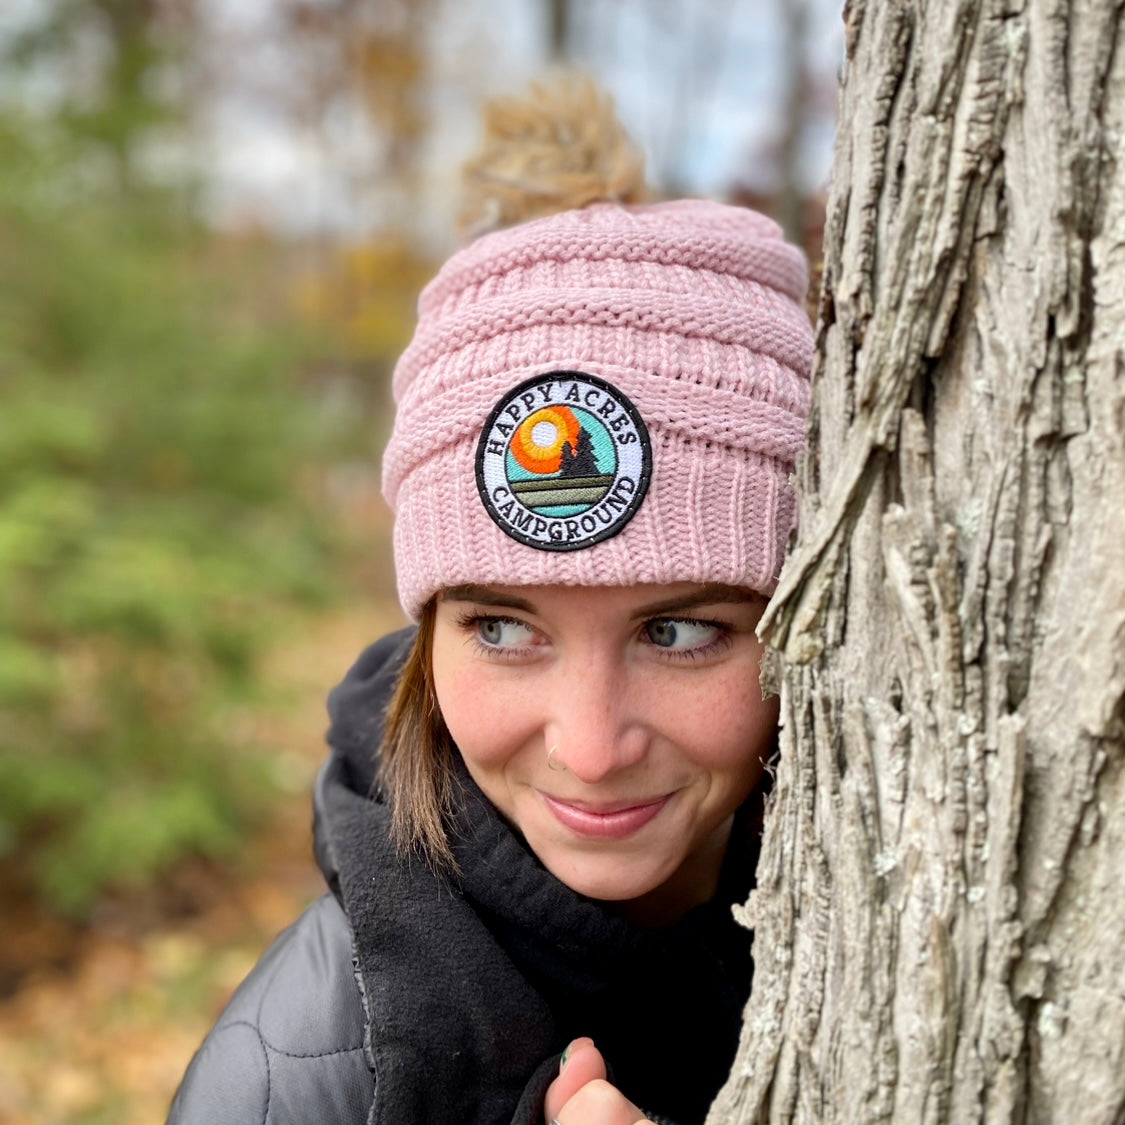 woman wearing patch hat leaning on a tree